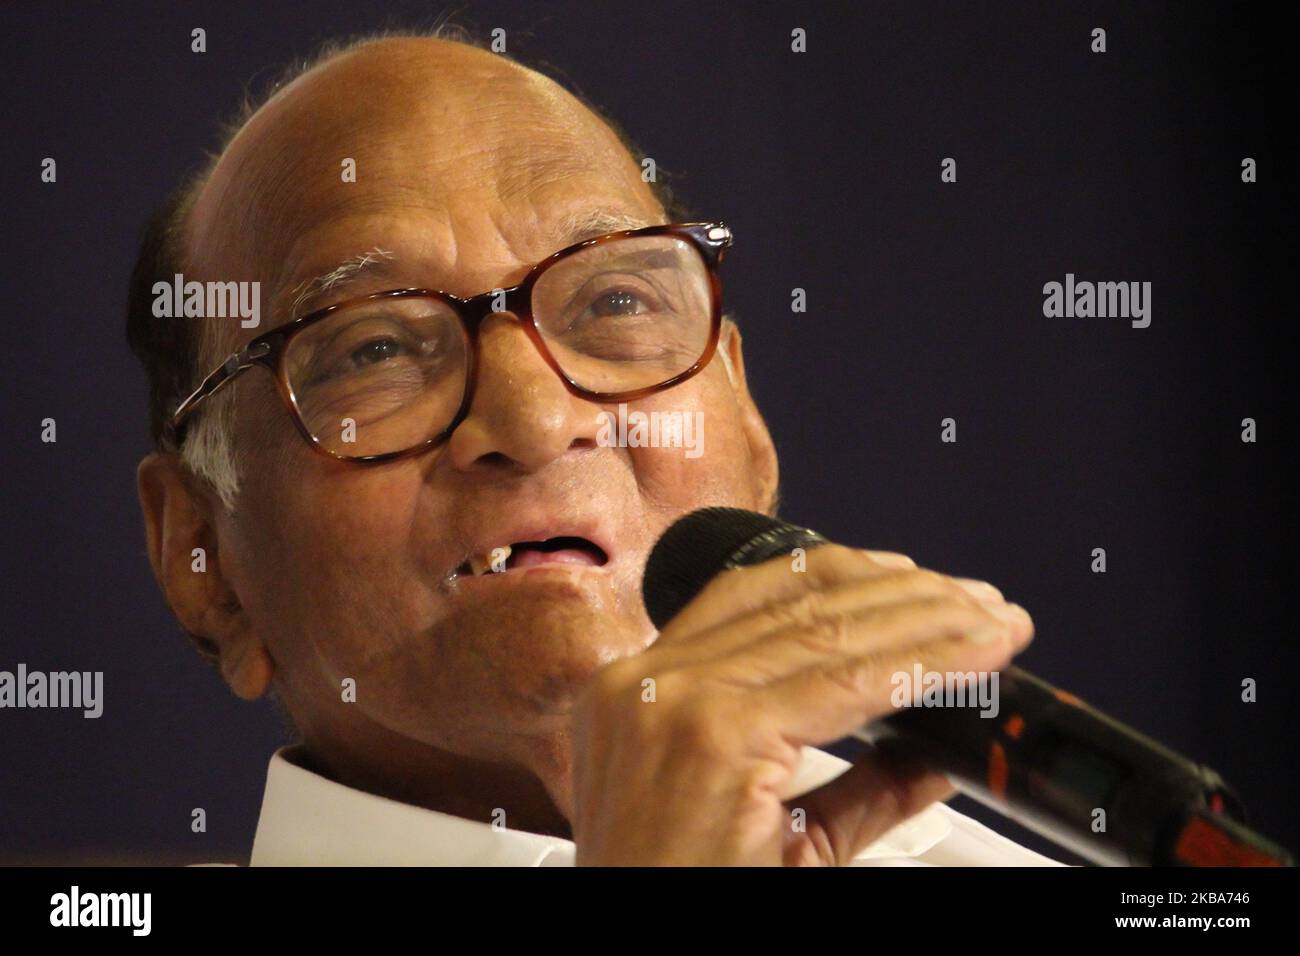 The Nationalist Congress Party (NCP) chief, Sharad Pawar reacts during a press conference in Mumbai, India on 06 November 2019. (Photo by Himanshu Bhatt/NurPhoto) Stock Photo